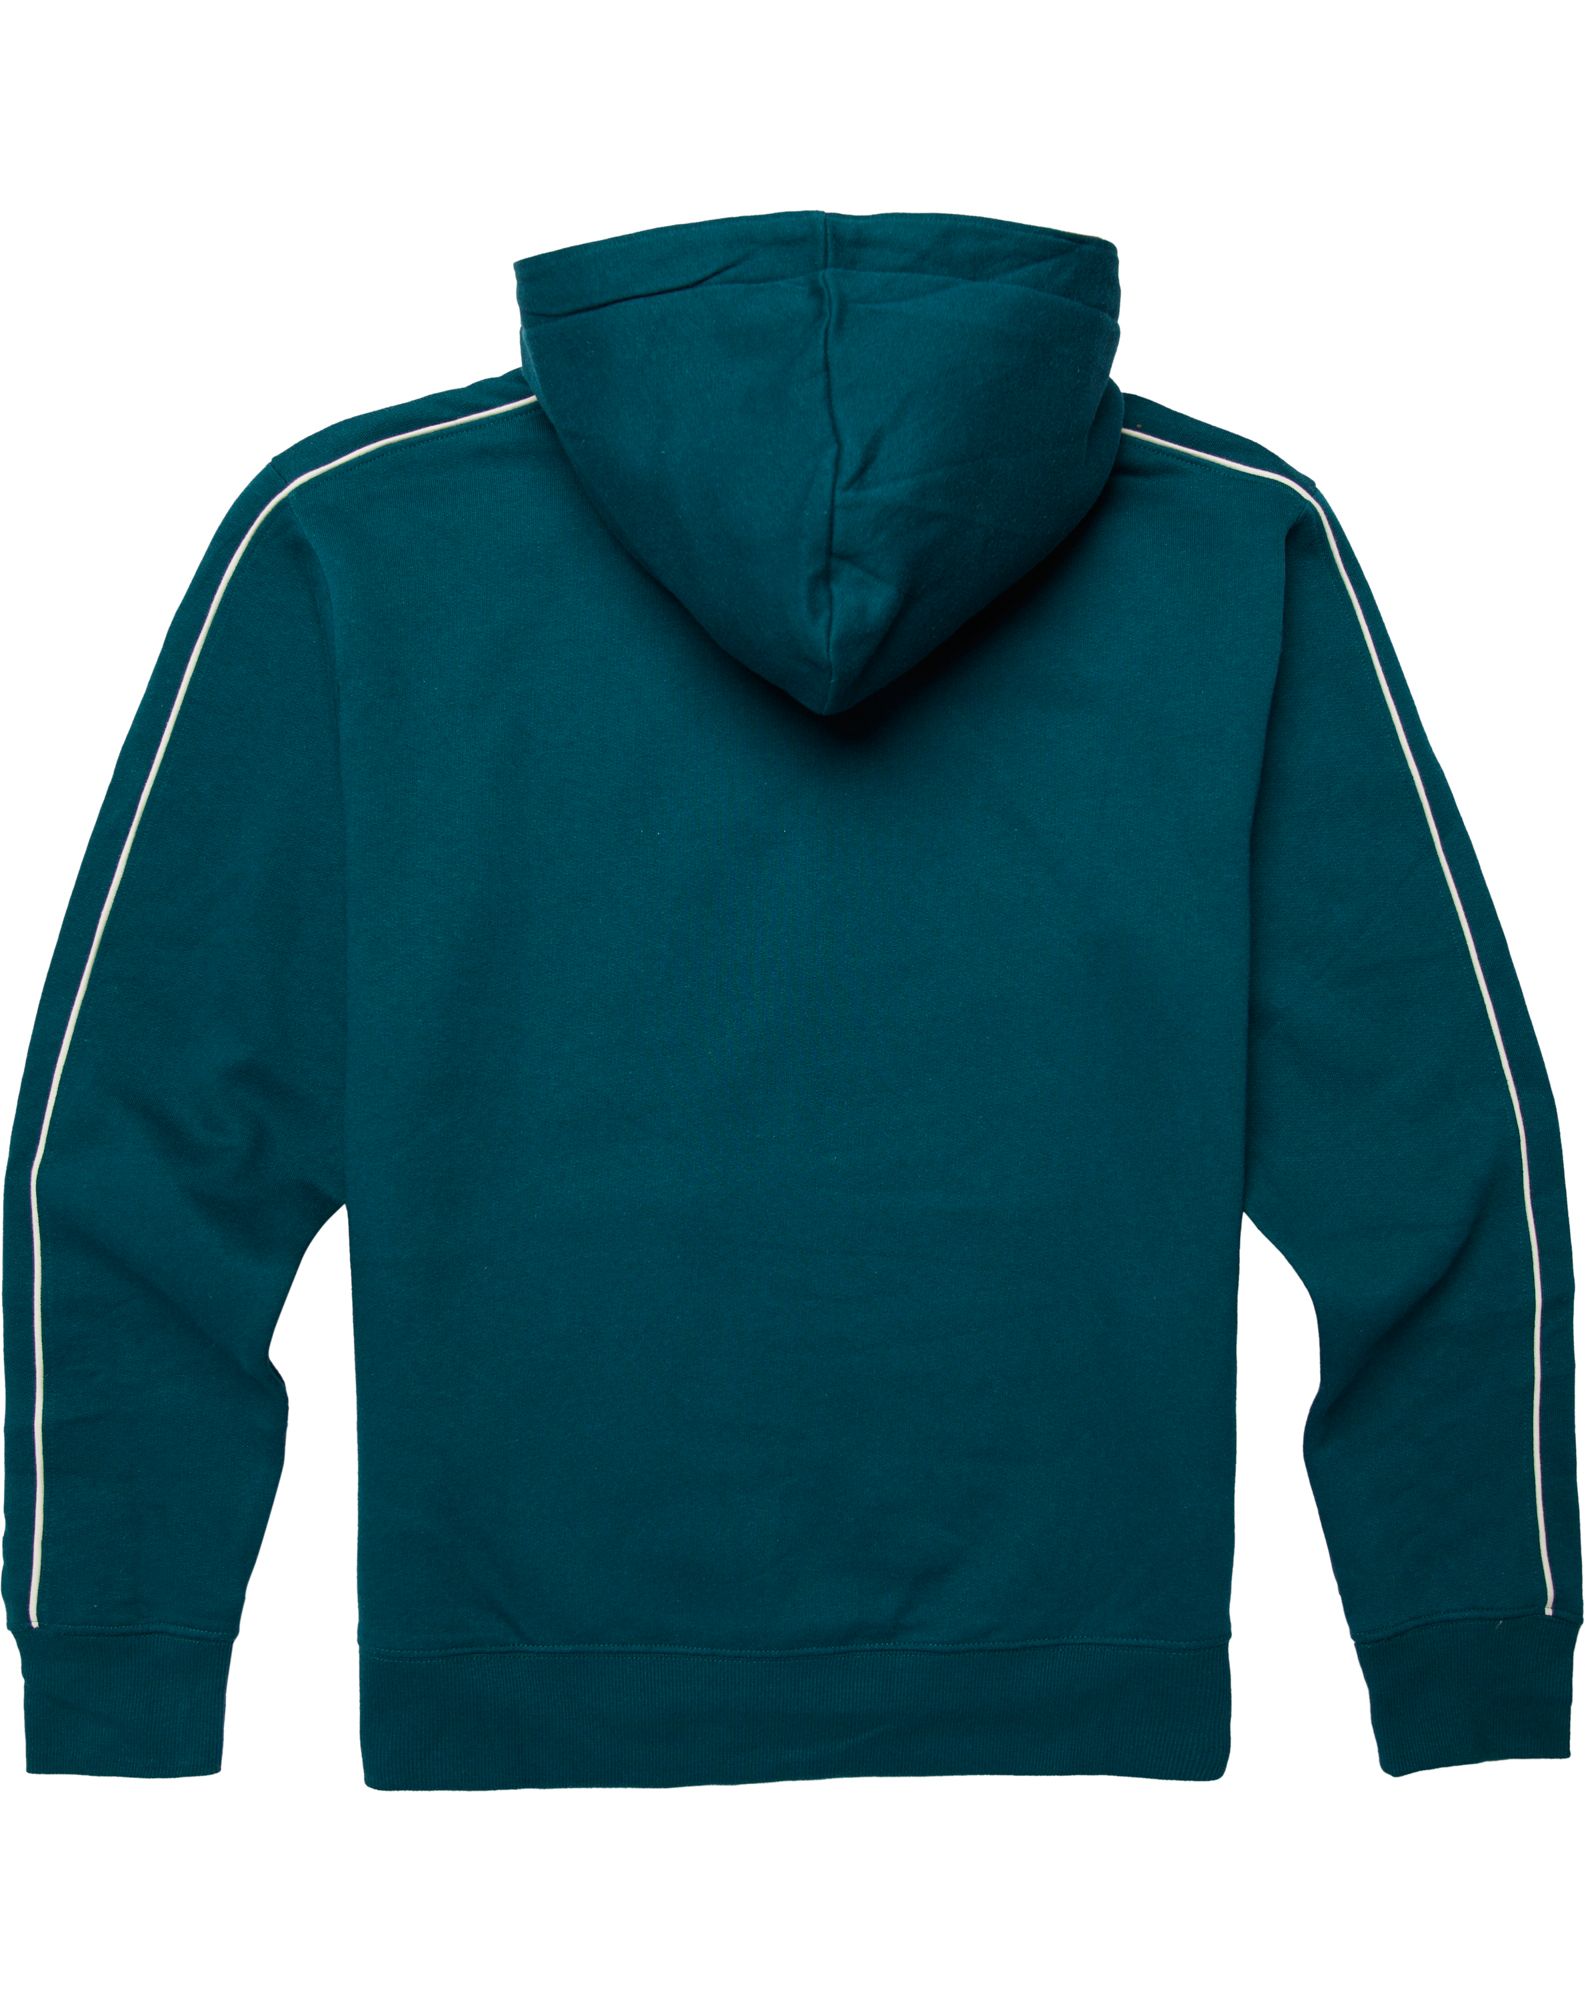 Cotopaxi Men's Sunny Side Pullover Hoodie